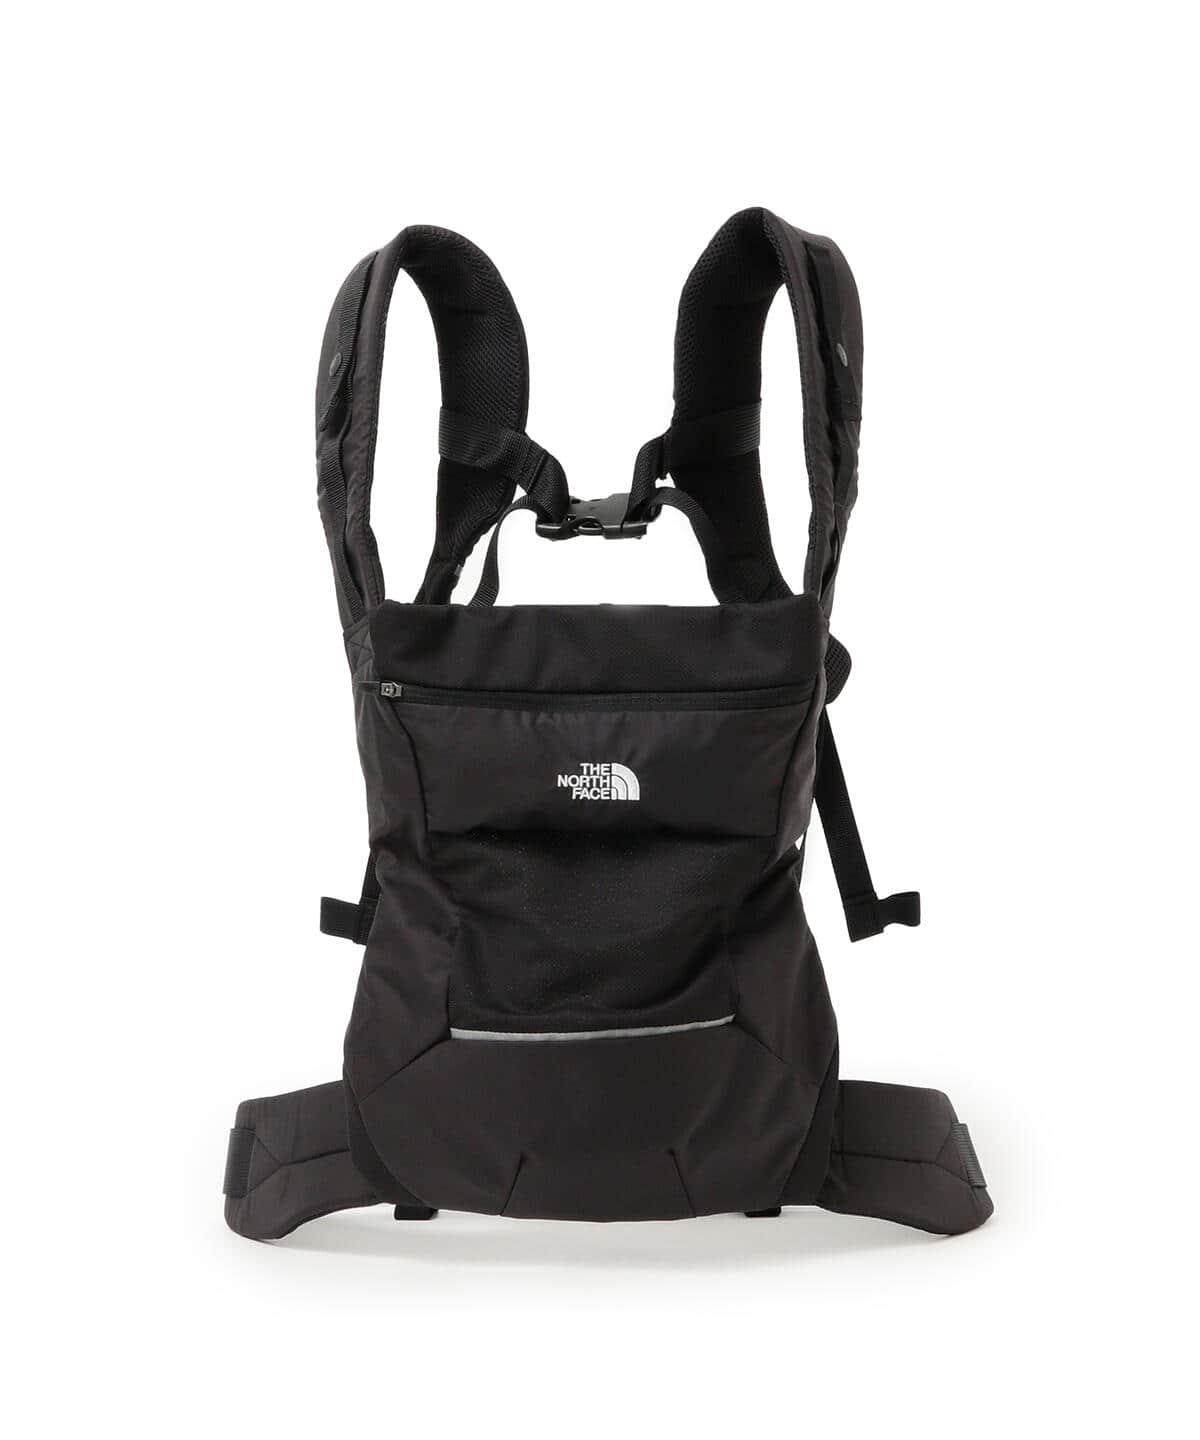 merrier BEAMS THE NORTH FACE merrier BEAMS Baby compact carrier